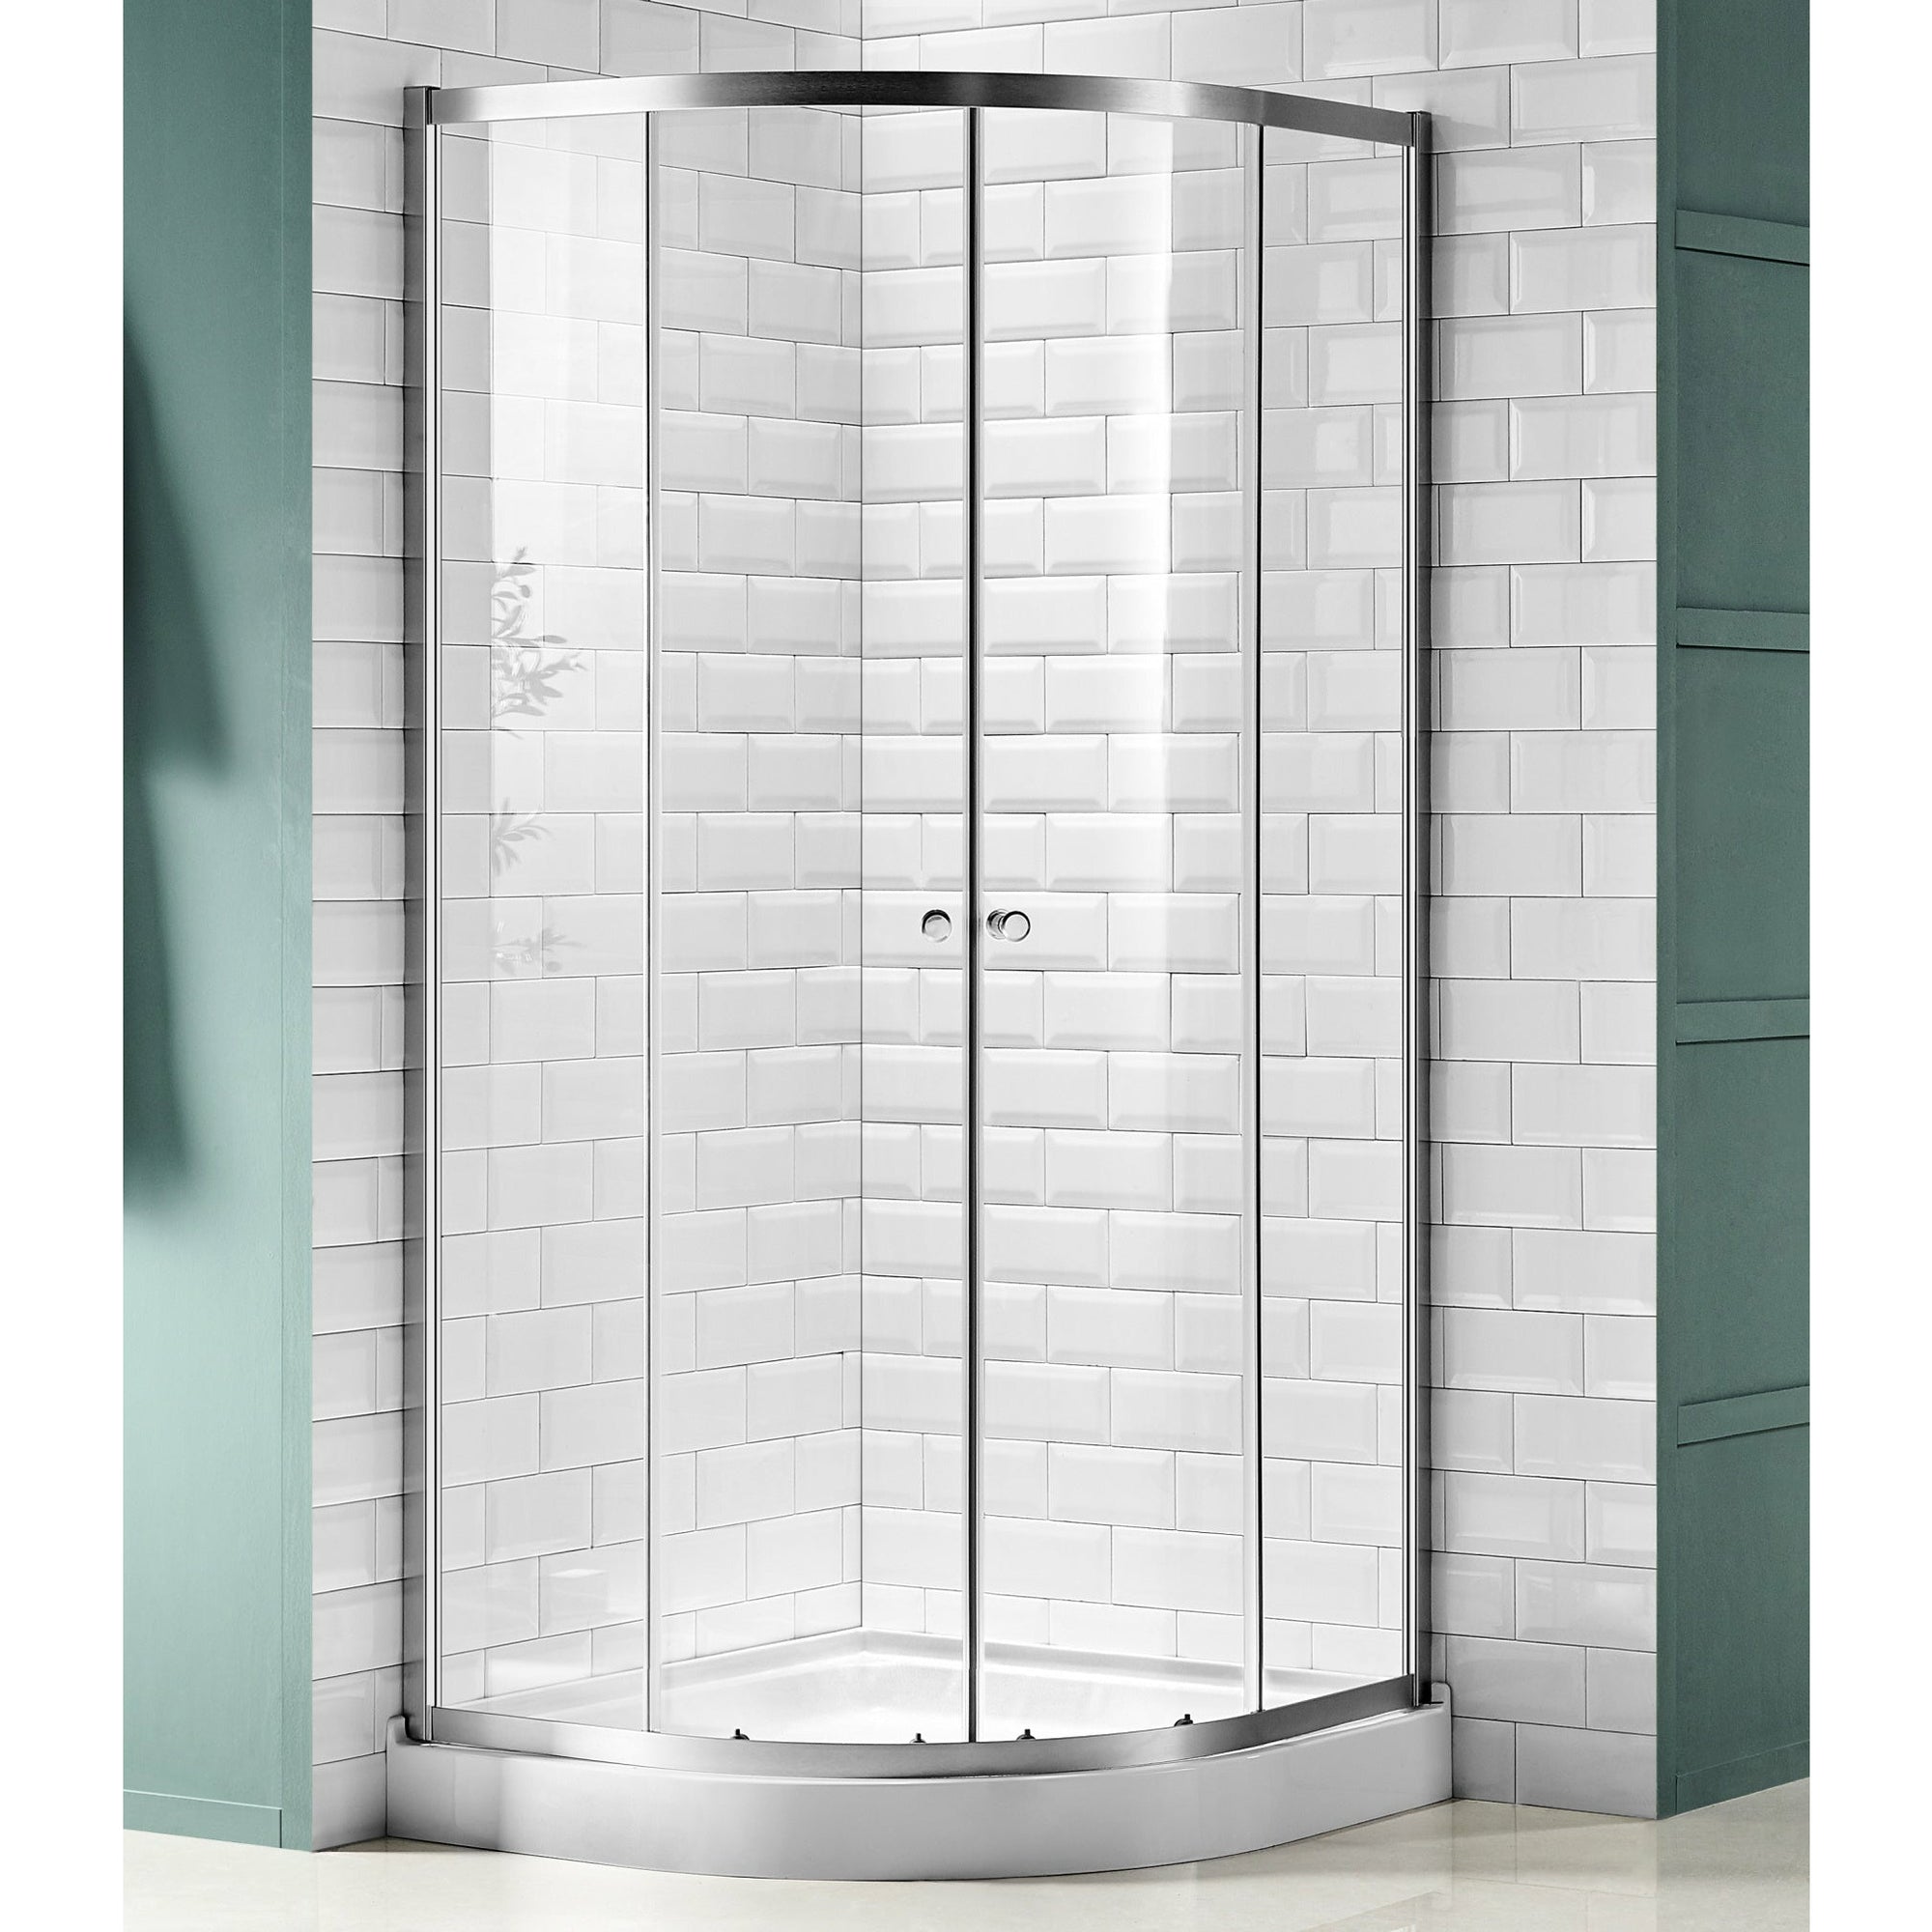 Anzzi Mare 35 in. X 76 in. Framed Shower Enclosure With Tsunami Guard - Tempered Glass - Marine Grade Aluminum Alloy Frame - Brushed Nickel - SD-AZ050-01 - Vital Hydrotherapy